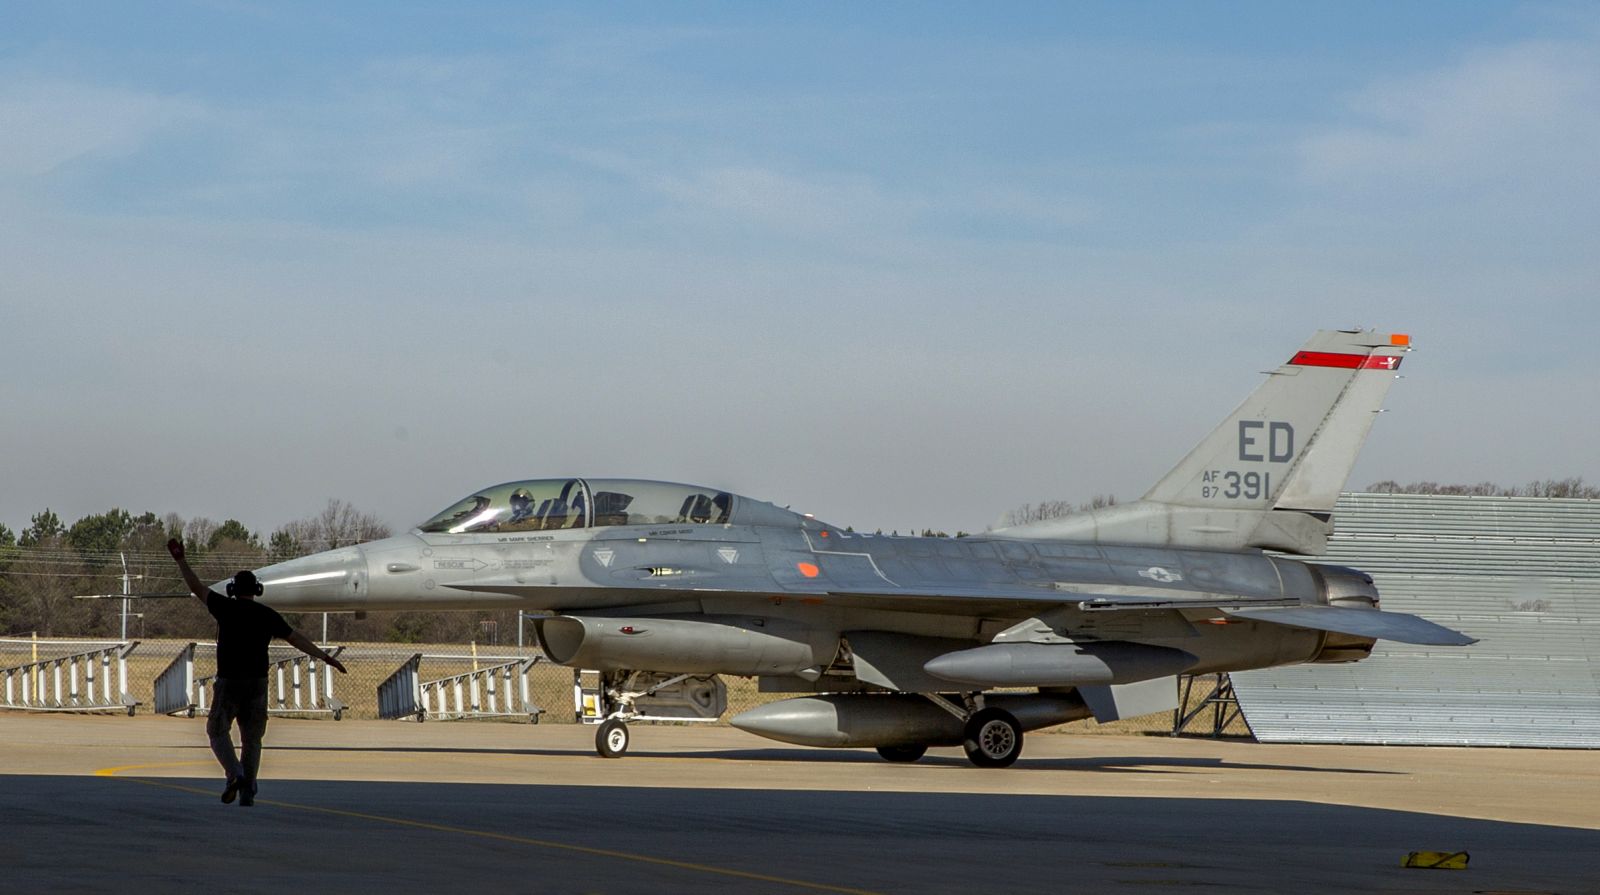 Lockheed Martin's Greenville site received its first F-16 from the U.S. Air Force as part of the $900 million contract the company received in 2020 to provide sustainment support and depot-overflow services for F-16 aircraft. (Photo/Provided)